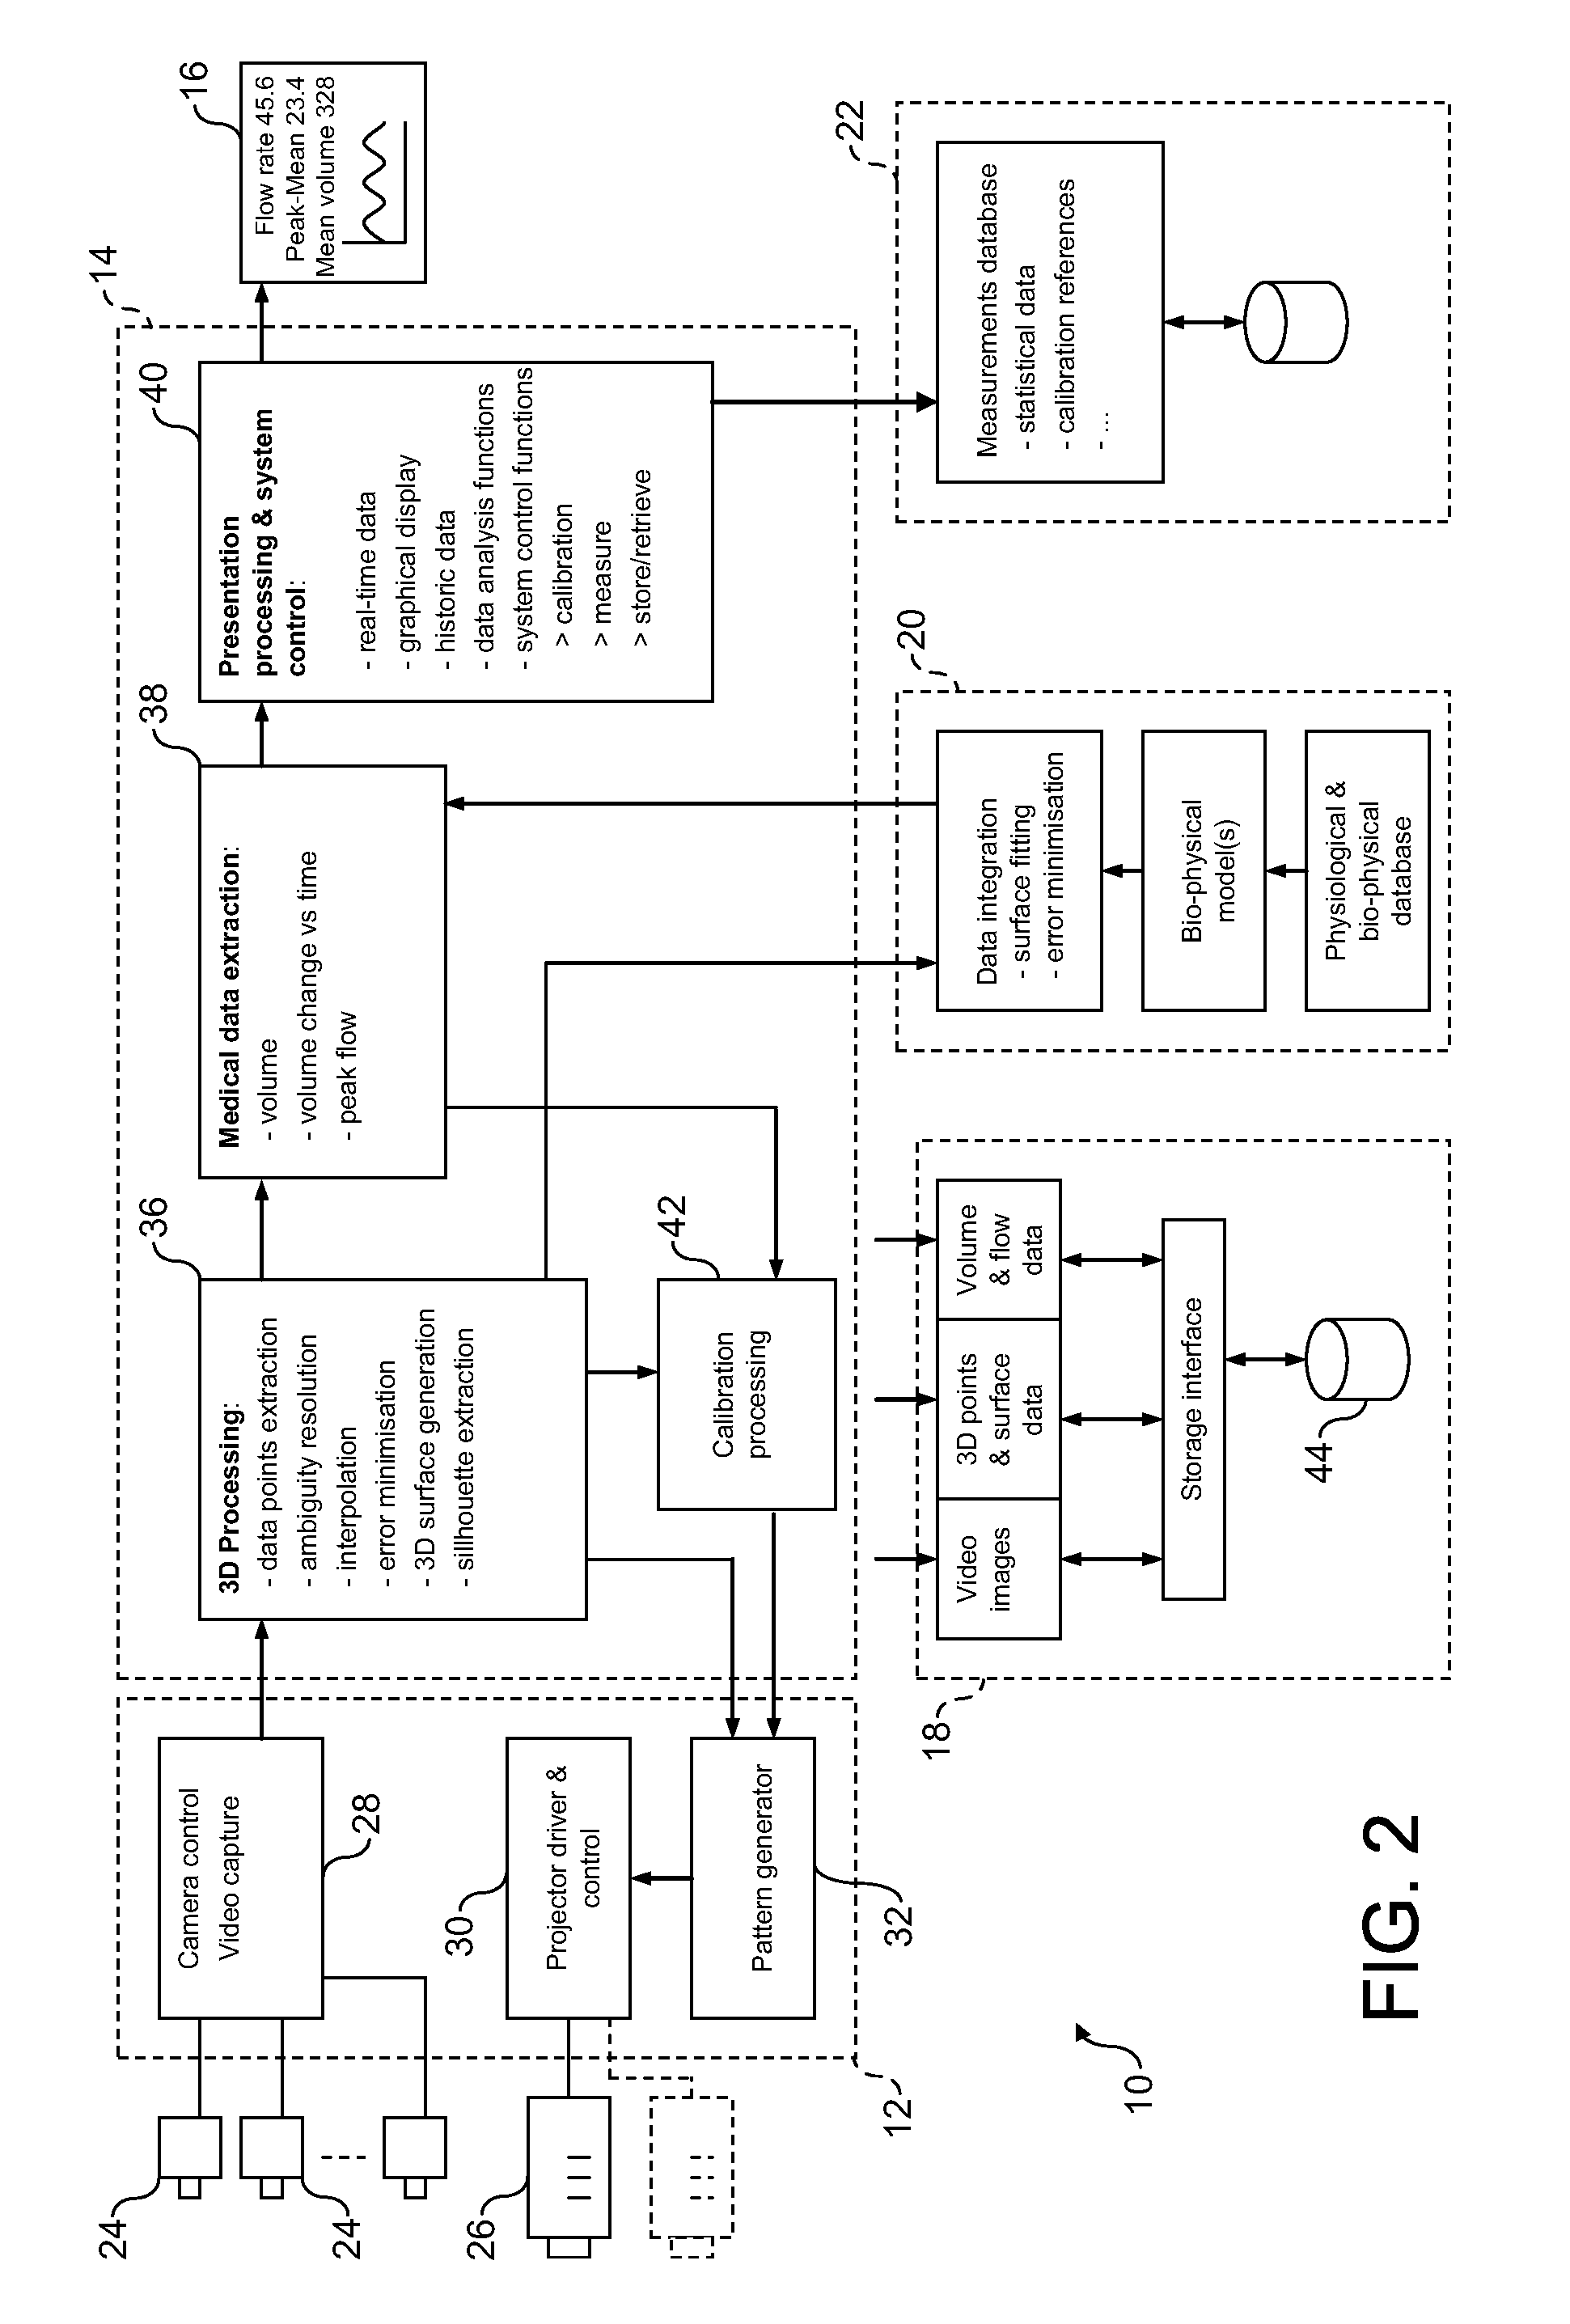 Method and apparatus for monitoring an object